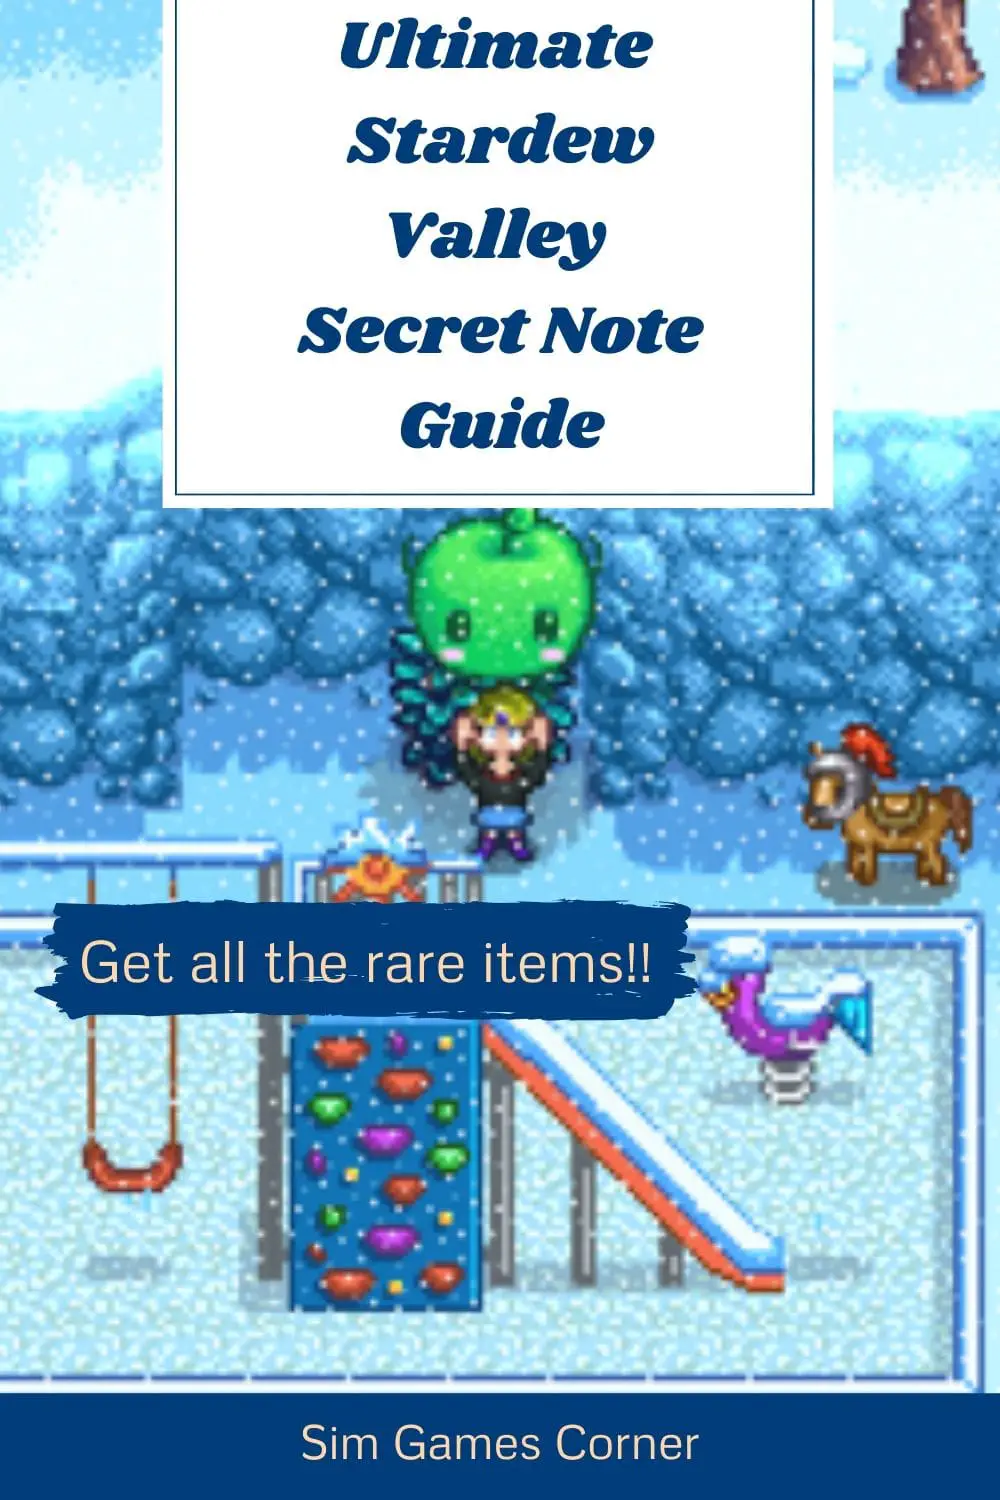 Ultiamte Stardew Valley Secret Notes Guide pin